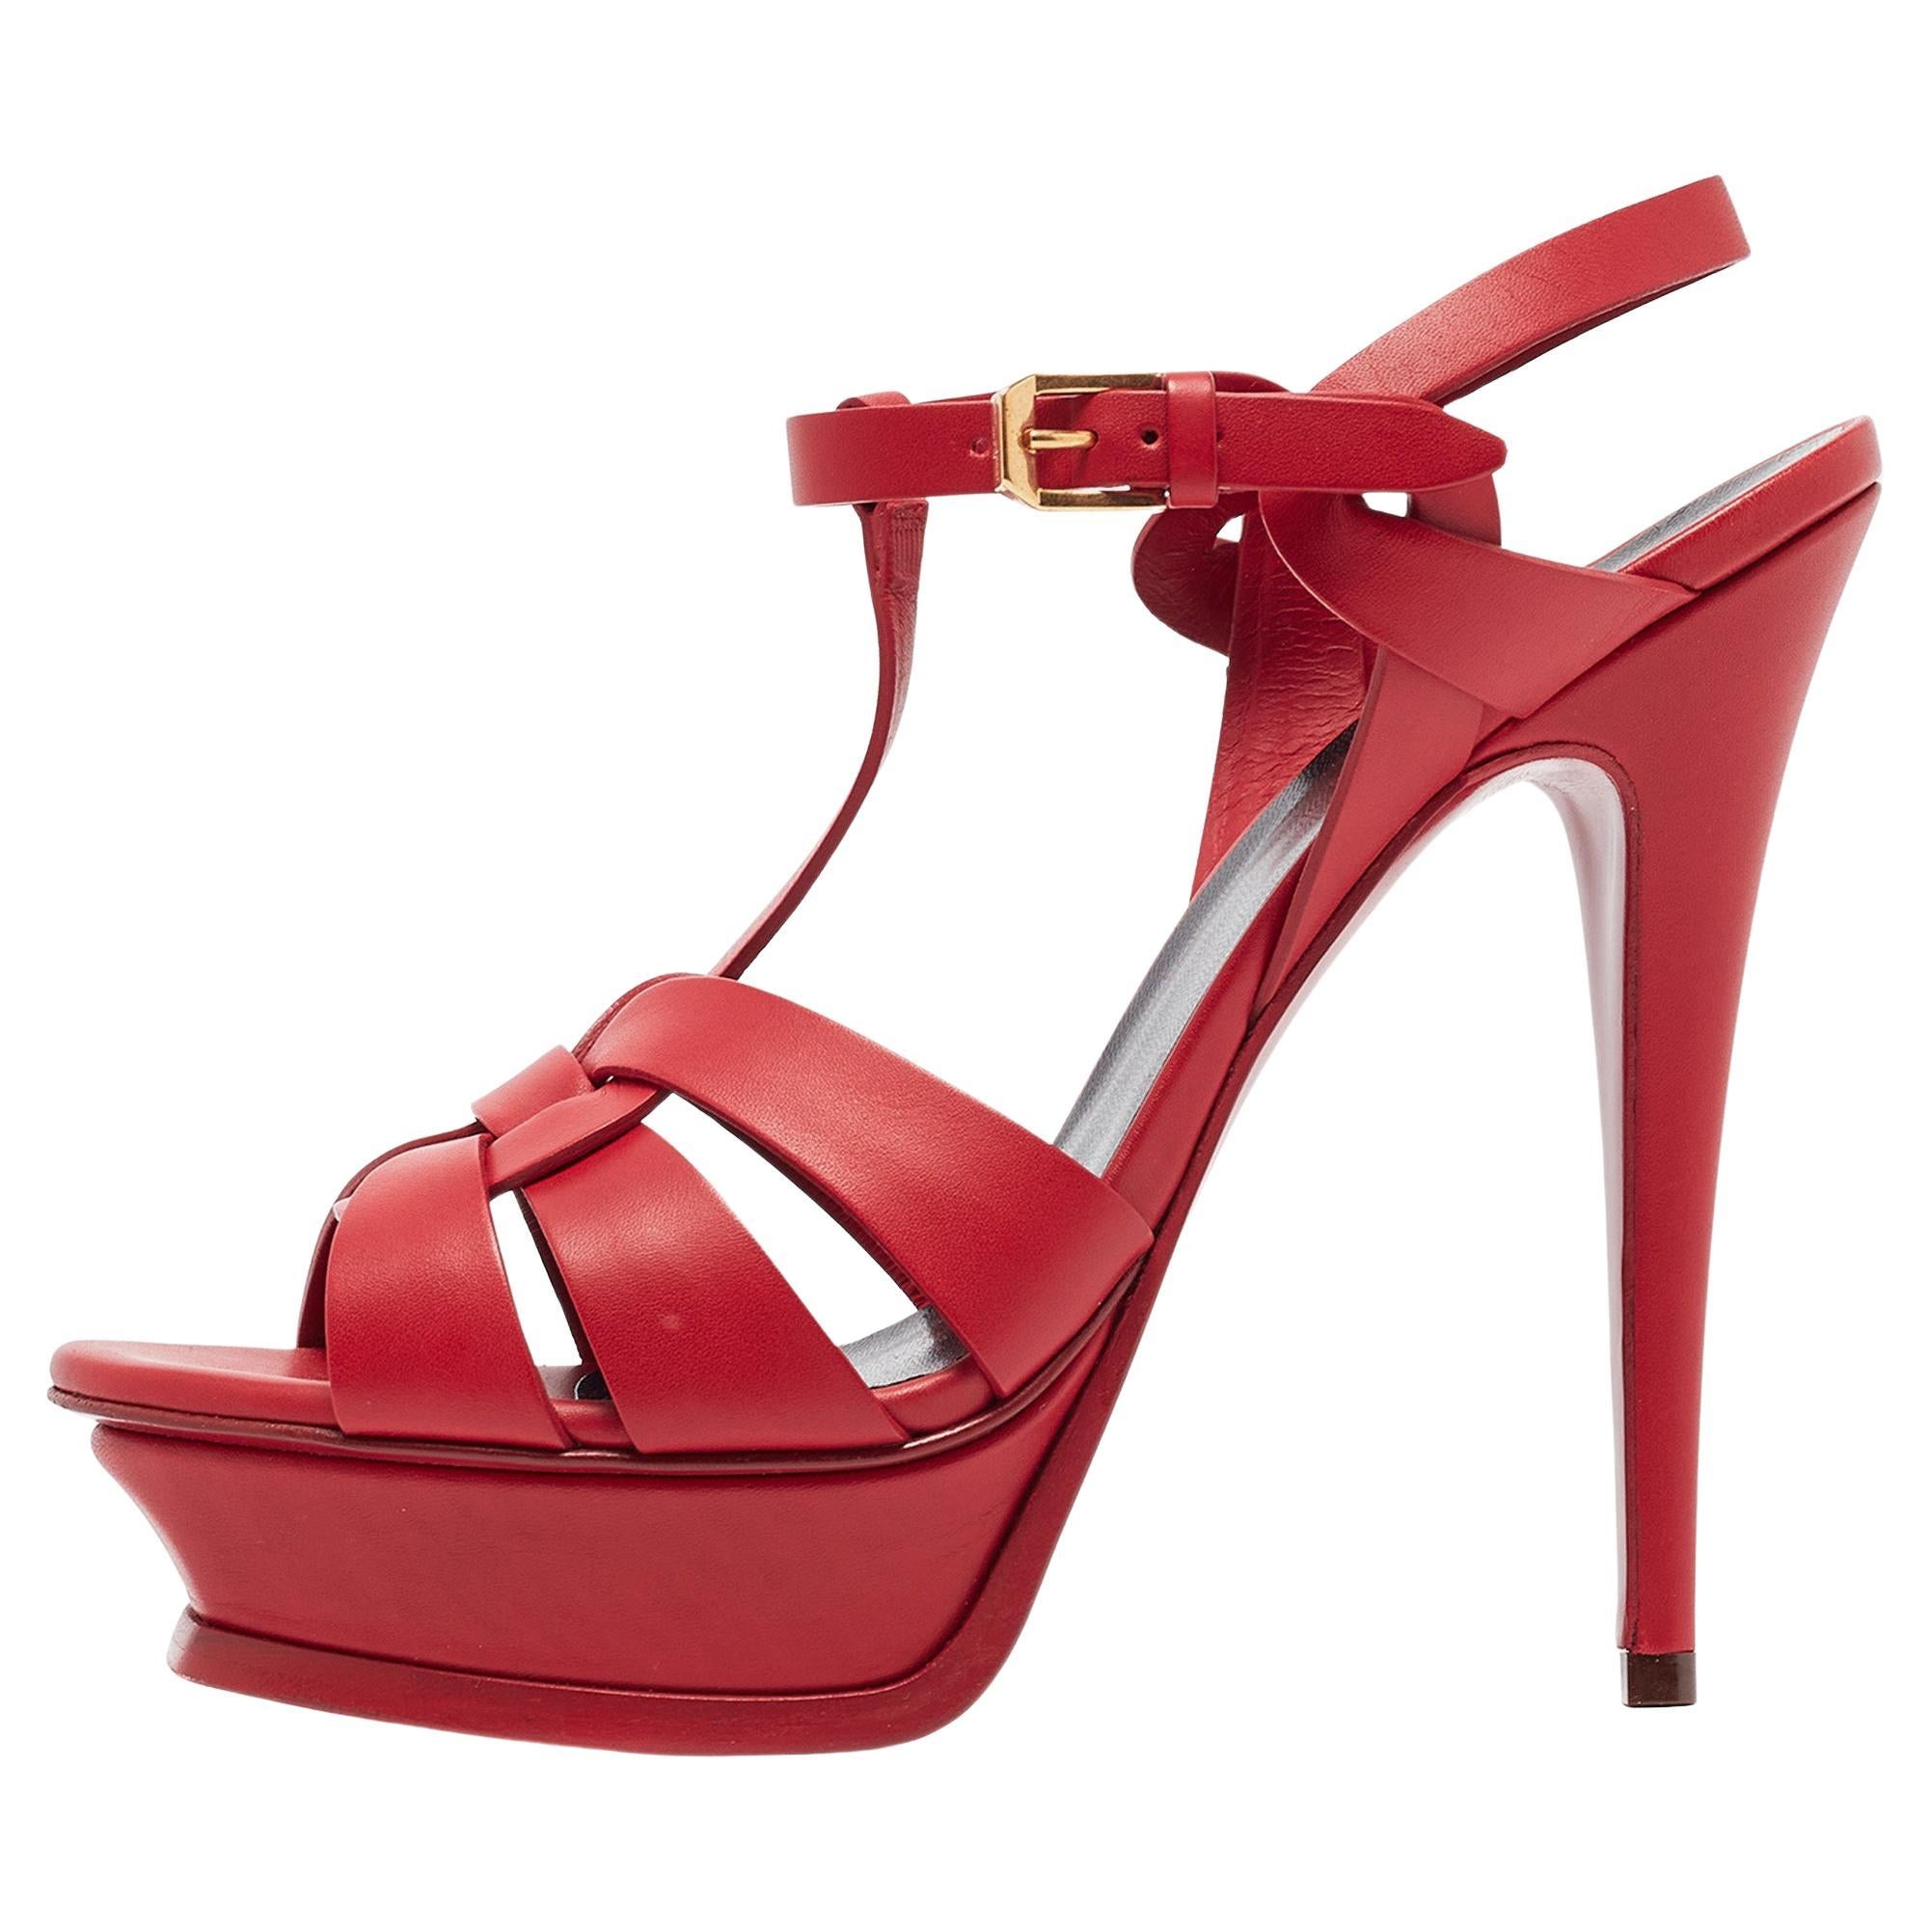 Saint Laurent Red Leather Tribute Sandals Size 38.5 For Sale